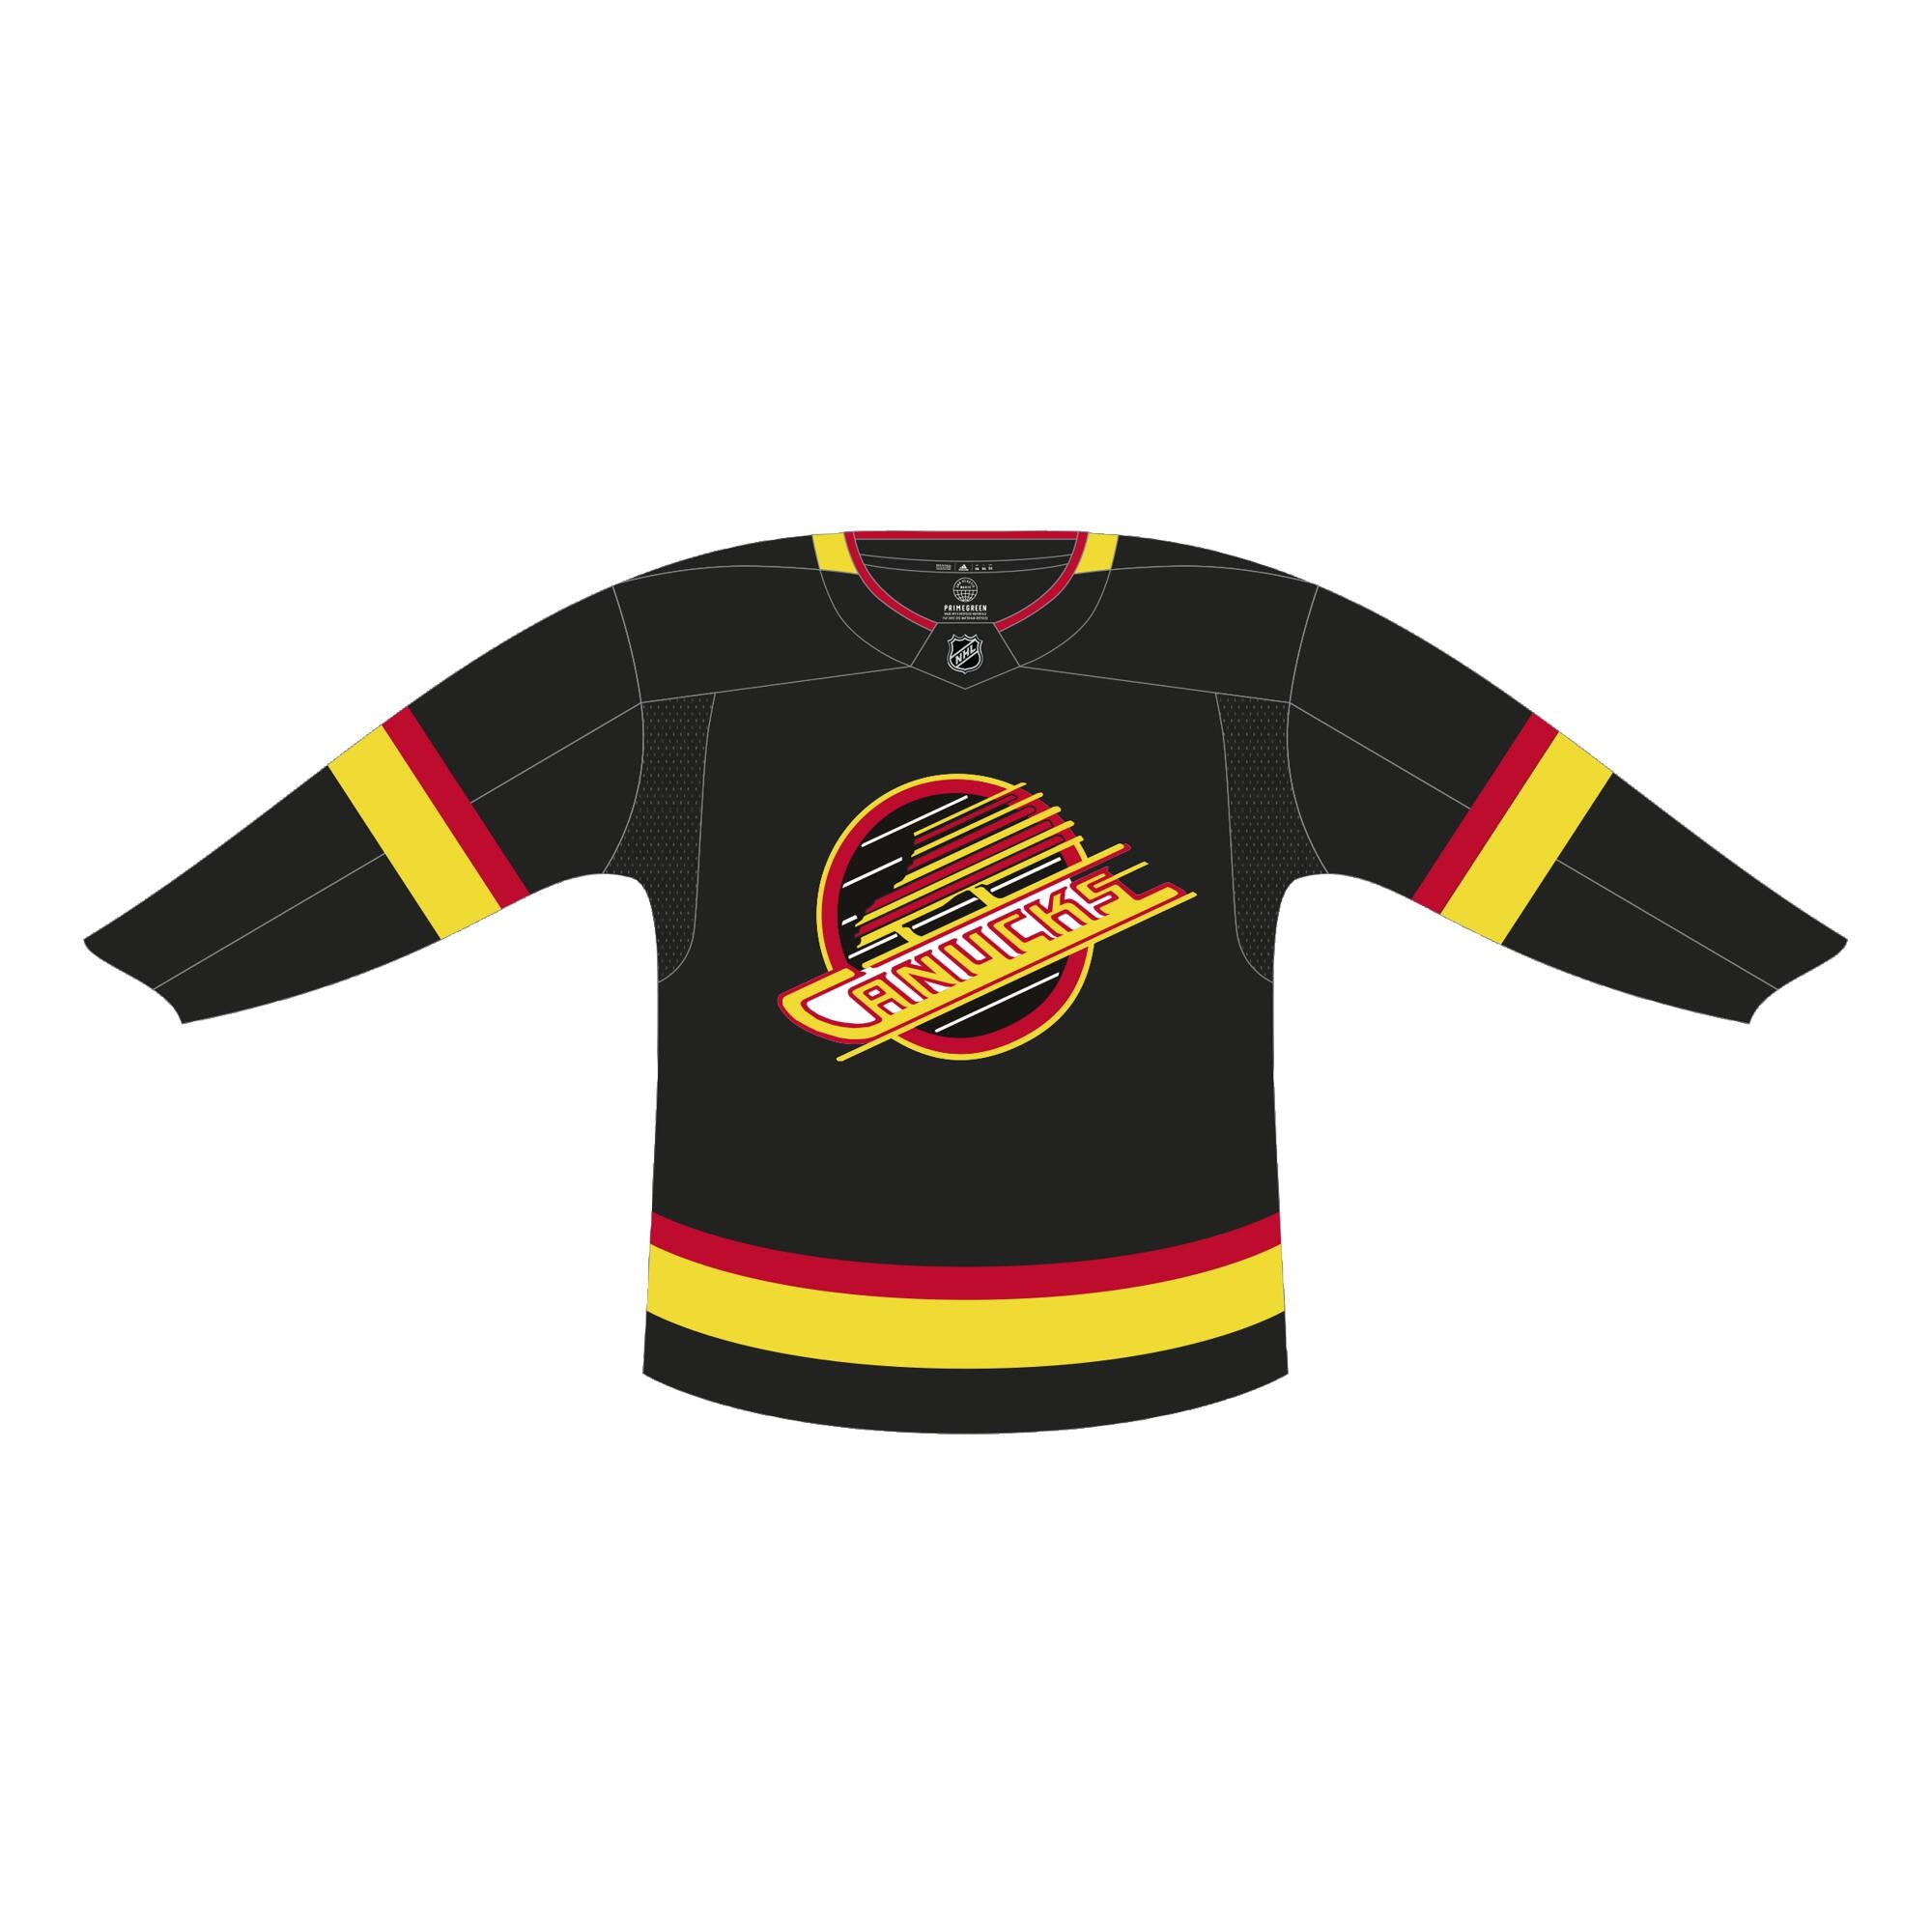 ANY NAME AND NUMBER VANCOUVER CANUCKS RETRO BLACK SKATE AUTHENTIC ADID –  Hockey Authentic